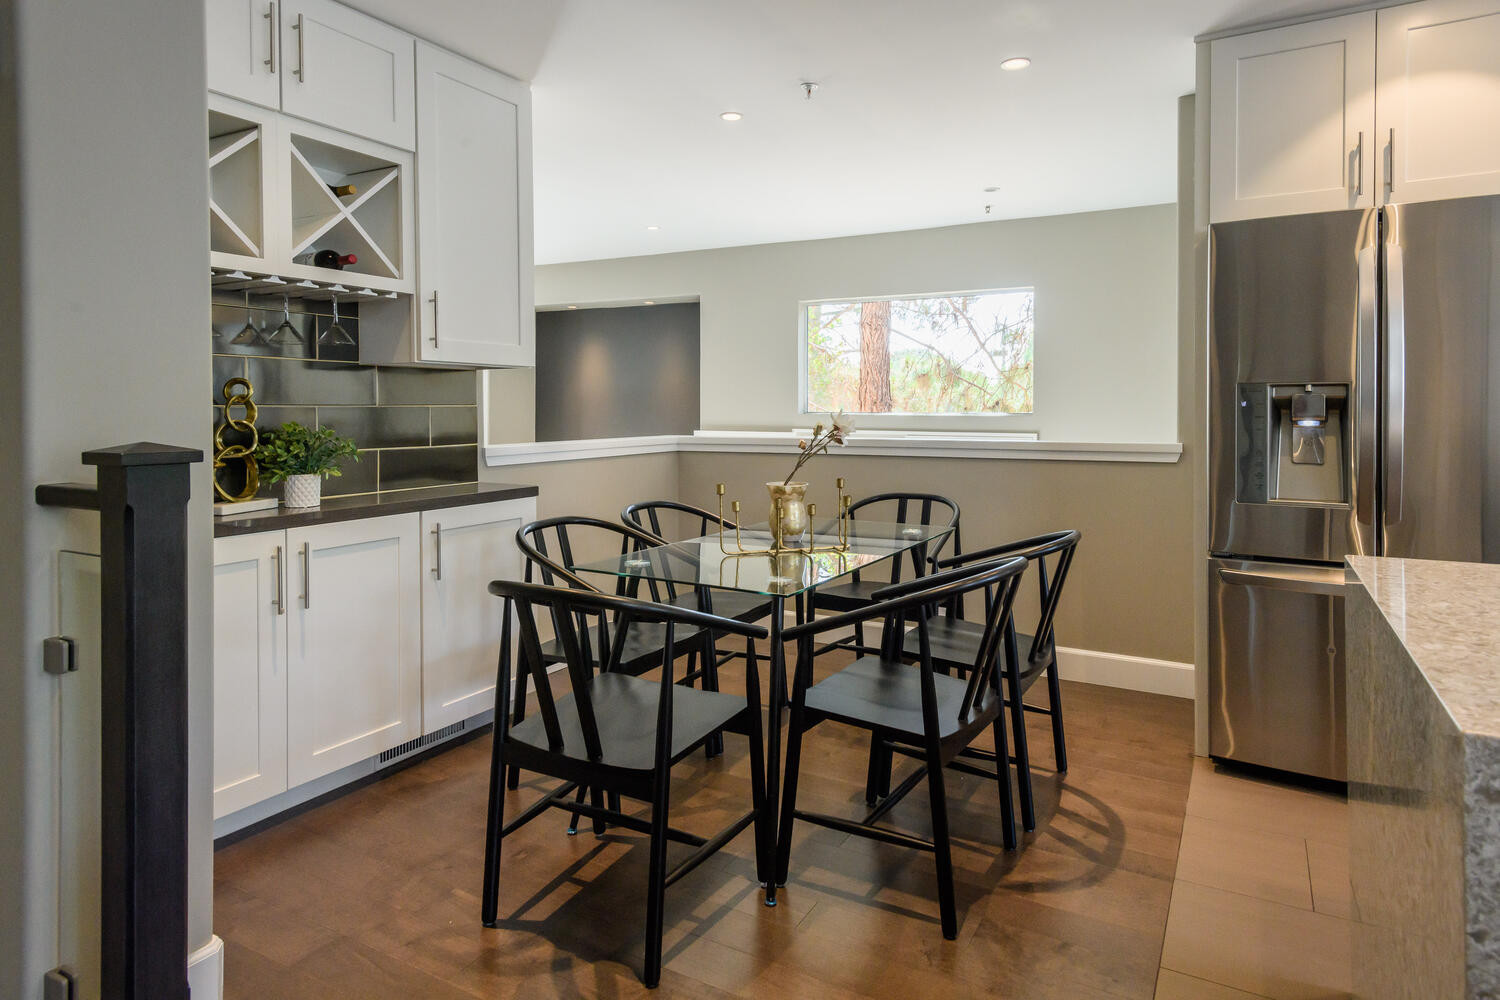 Dining Area in Lighthouse Cove area in Redwood Shores.